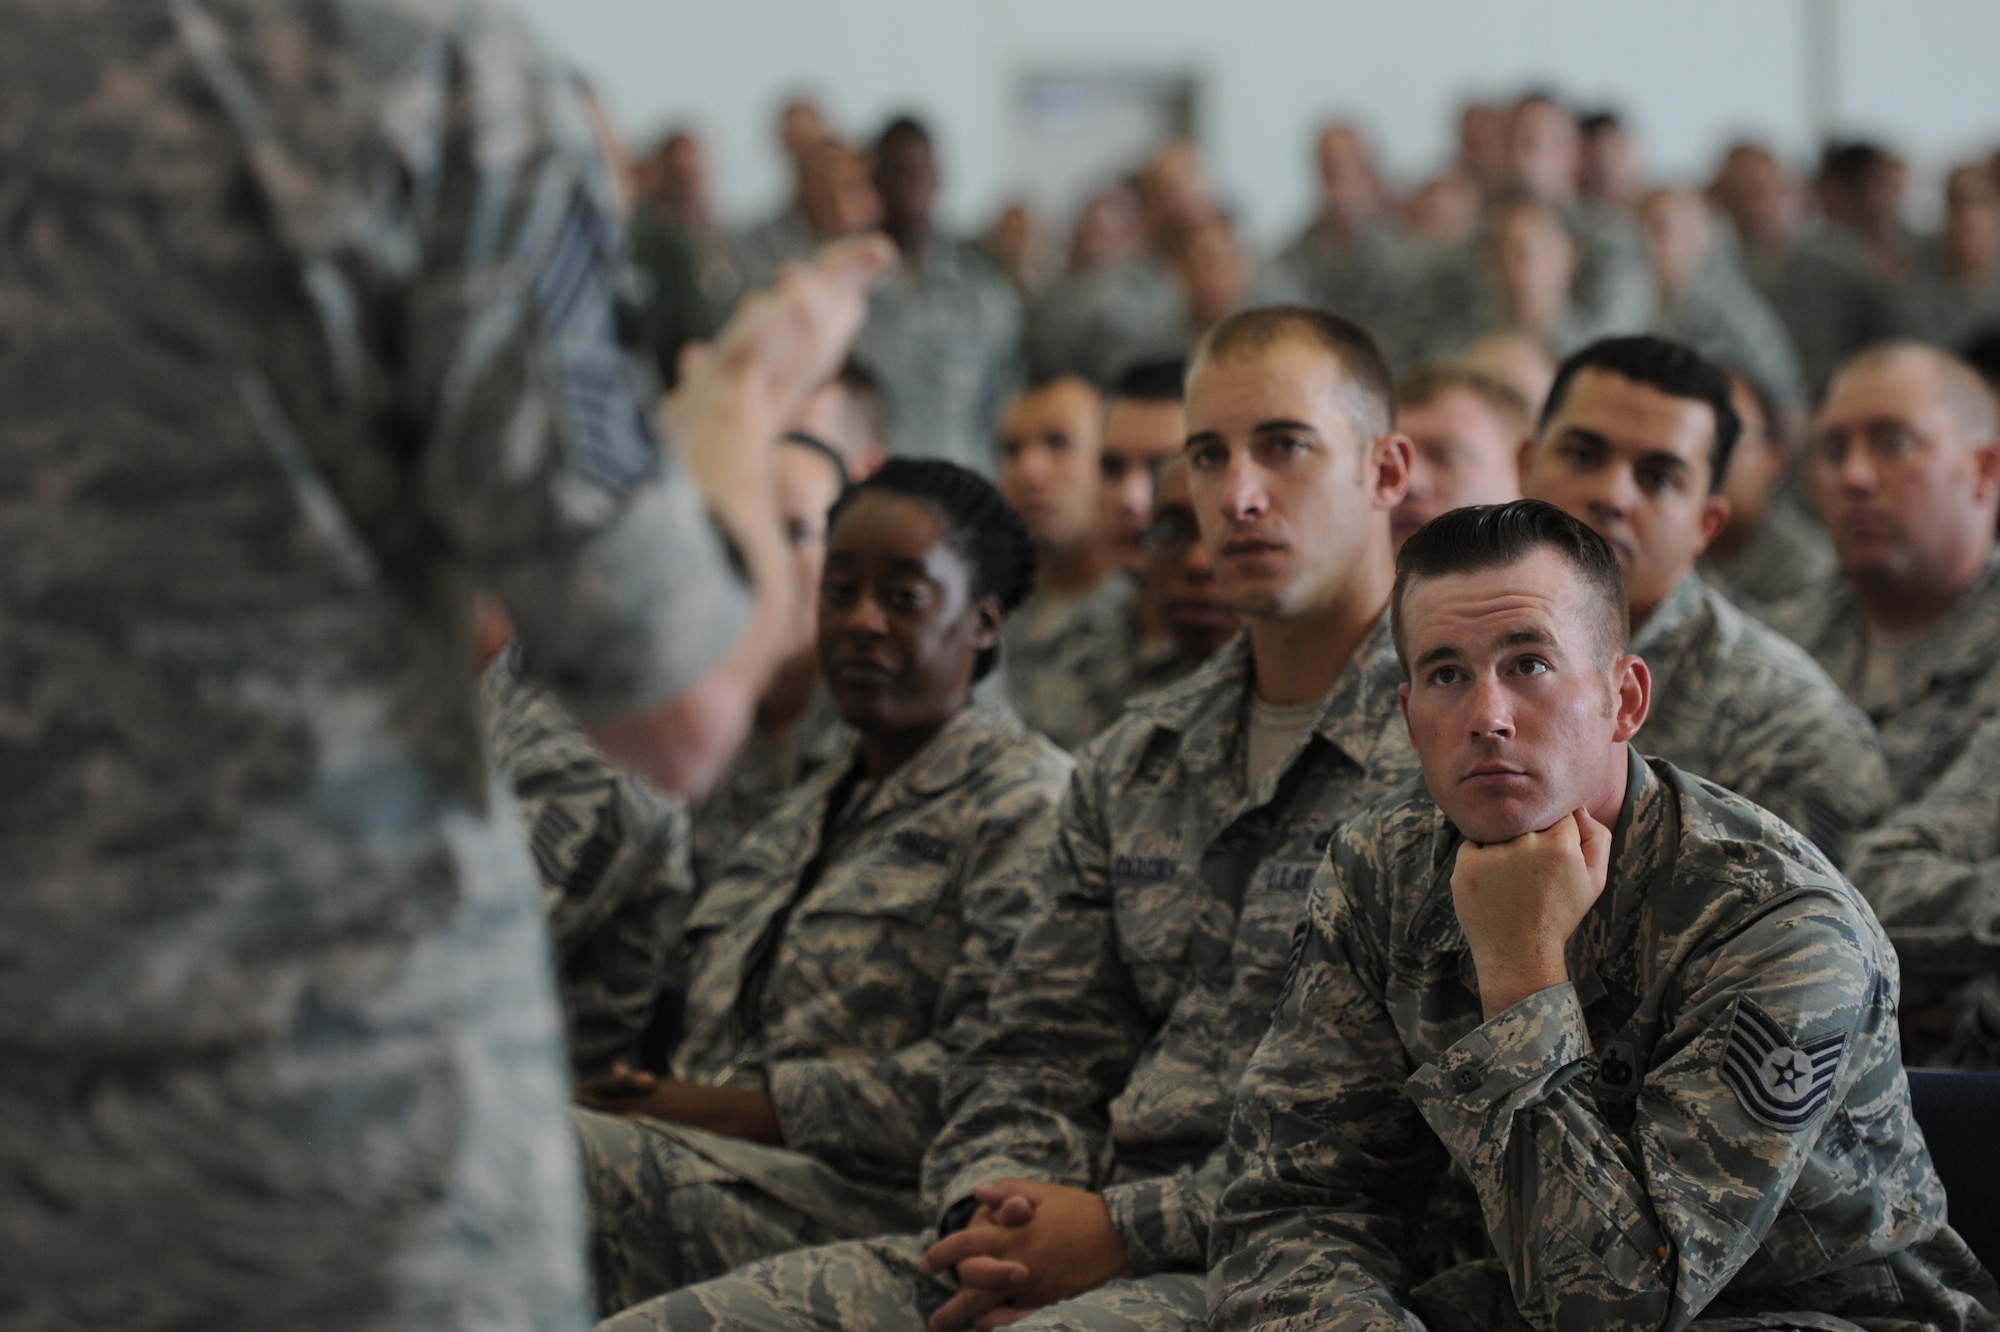 Airmen listen as Chief Master Sgt. of the Air Force James Cody delivers his enlisted perspective to the Airmen of the 432nd Wing/432nd Air Expeditionary Wing and 799th Air Base Group during an Airman’s Call at Creech Air Force Base, Nev., July 16, 2014. During his visit, Cody saw firsthand the operations tempo of the base’s Airmen.  Everyday Creech Airmen fulfill their mission by providing intelligence, surveillance and reconnaissance, maintenance, base support and defense, and other capabilities in support of combatant commanders around the globe. (U.S. Air Force photo by Tech. Sgt. Nadine Barclay/RELEASED)